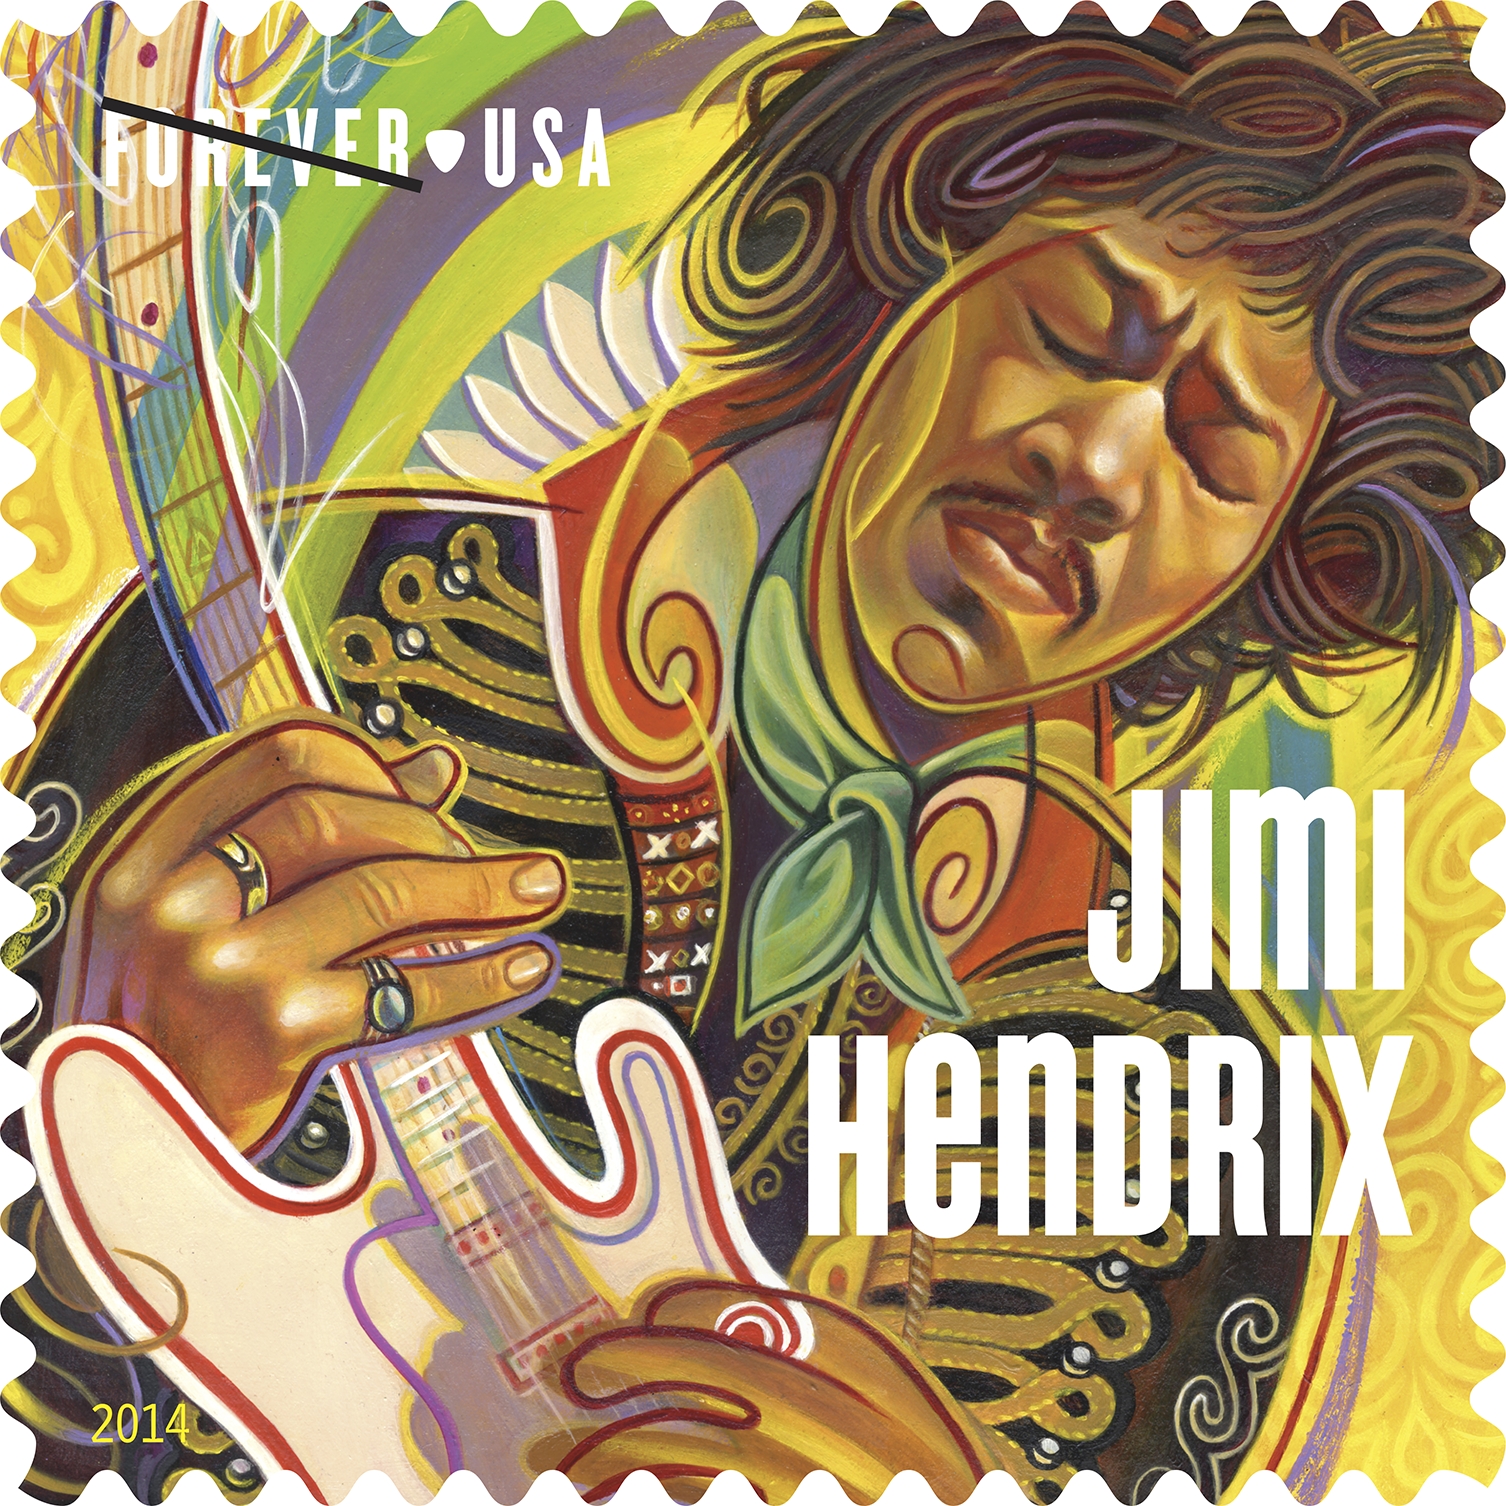 The USPS released a new Forever stamp honoring guitarist Jimi Hendrix. (United States Postal Service)